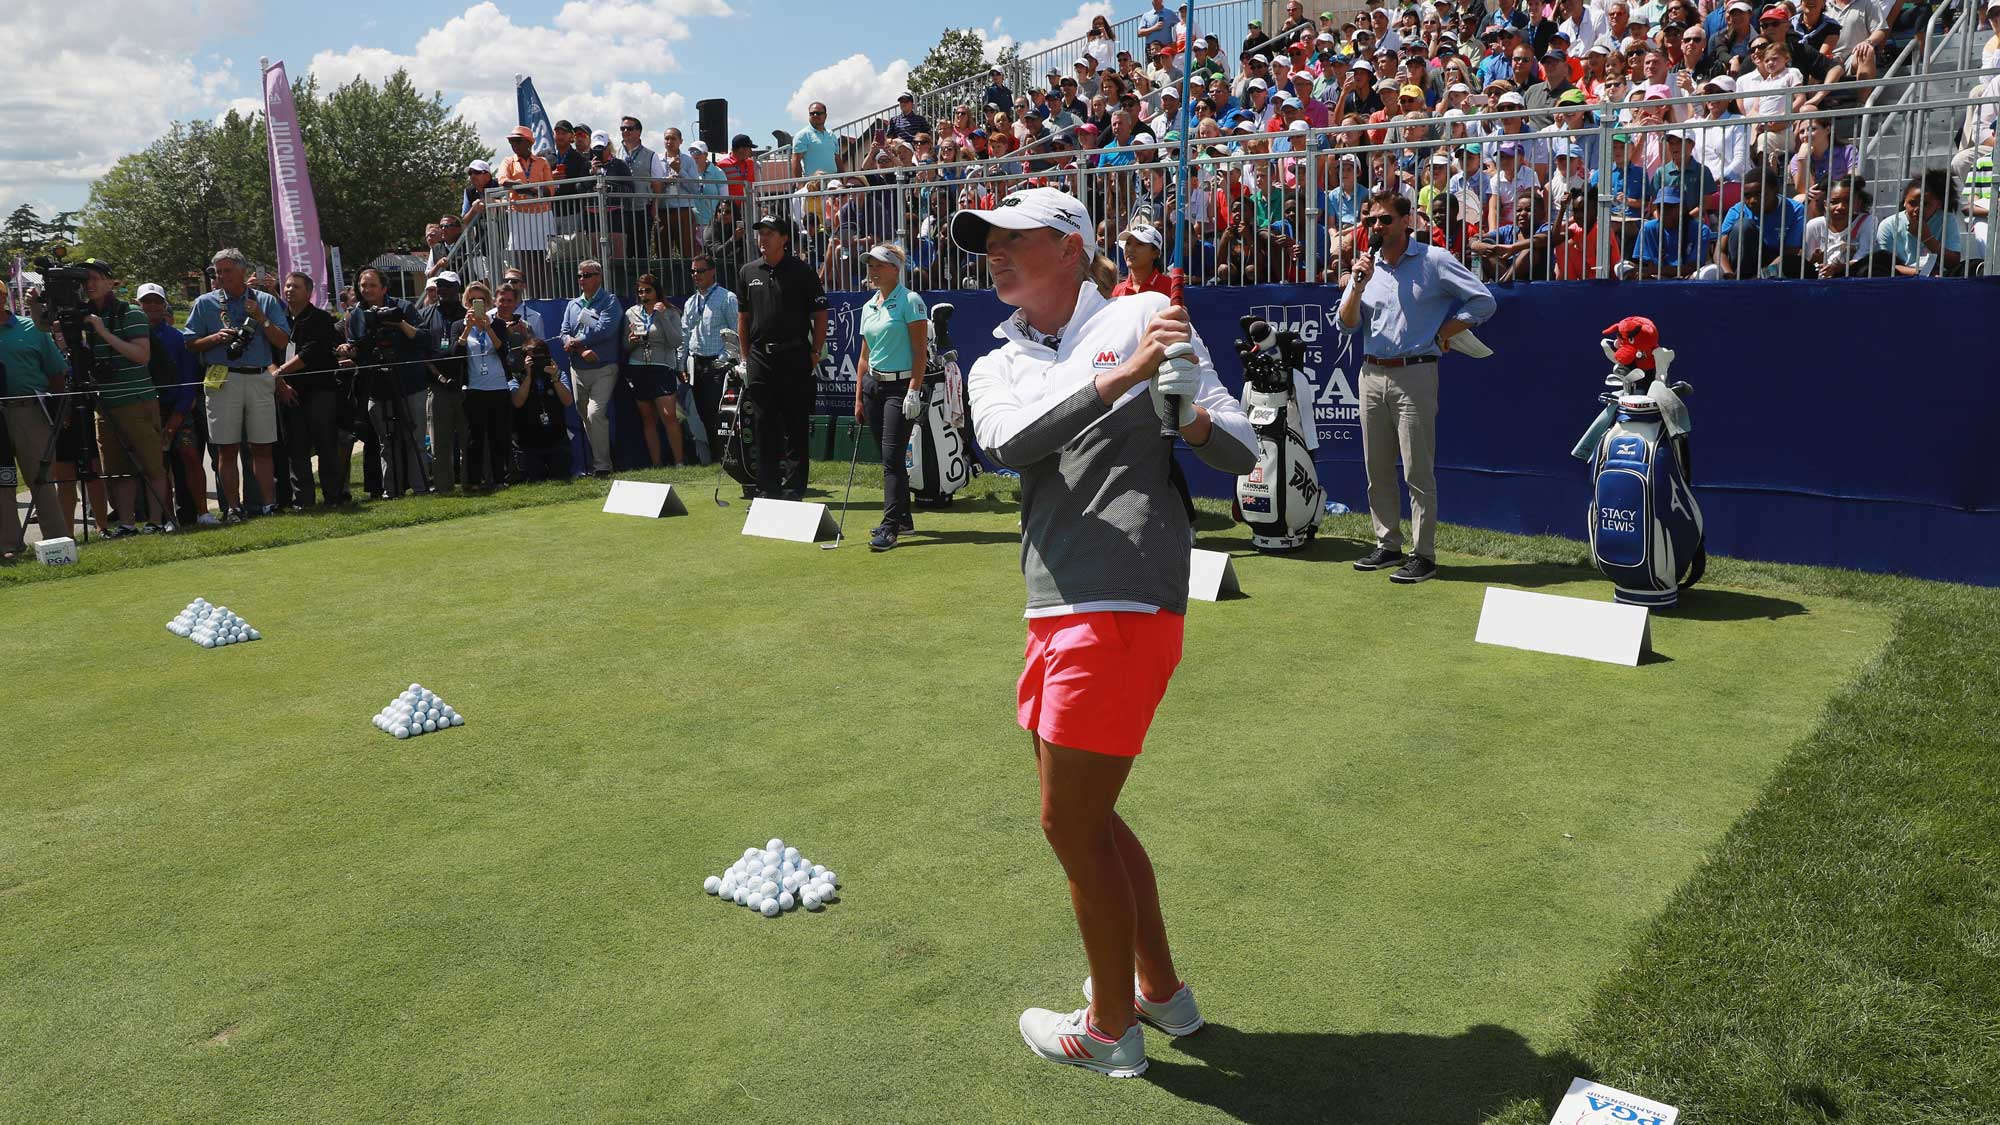 Stacy Lewis hits a shot during a a skills challenge prior to the start of the 2017 KPMG Women's PGA Championship